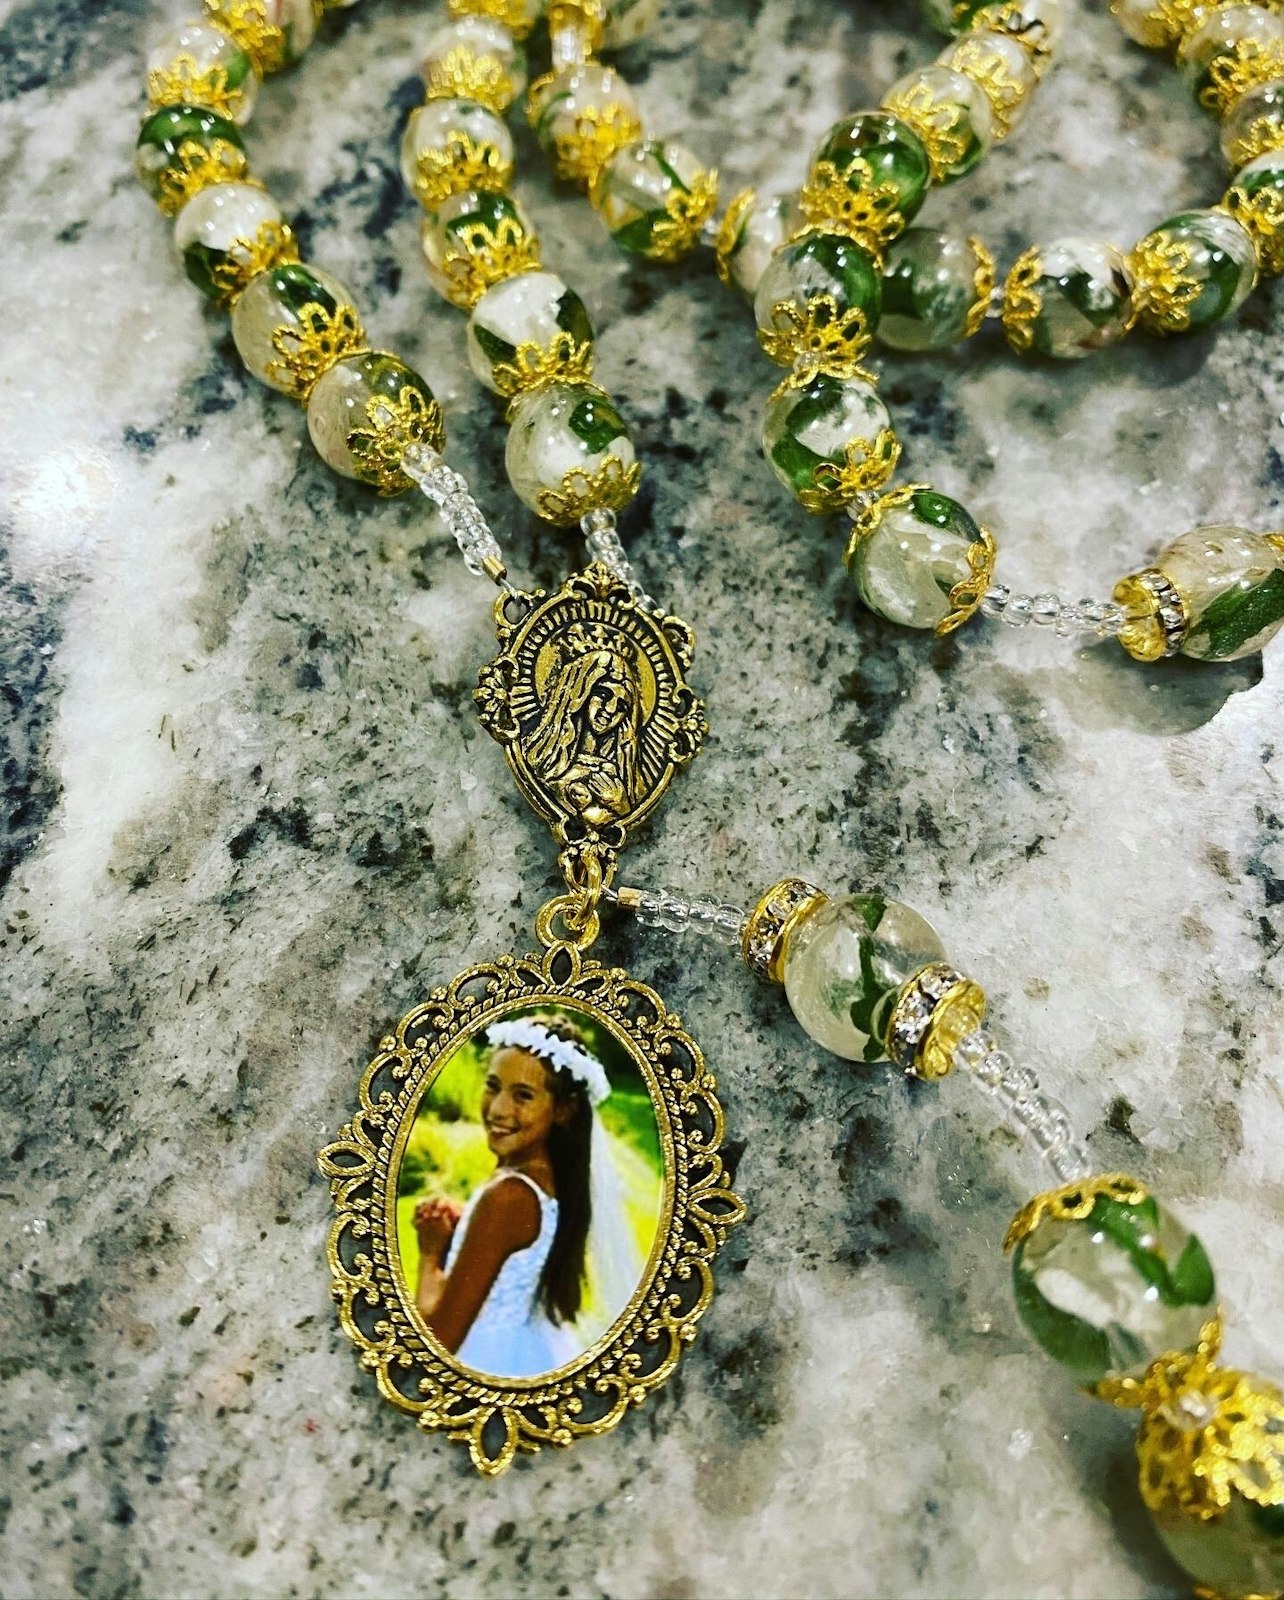 A rosary Joseph designed that was made from the centerpieces of a young girl's first Communion celebration. Her mother asked Joseph to add a photo pendant of her in her Communion gown.